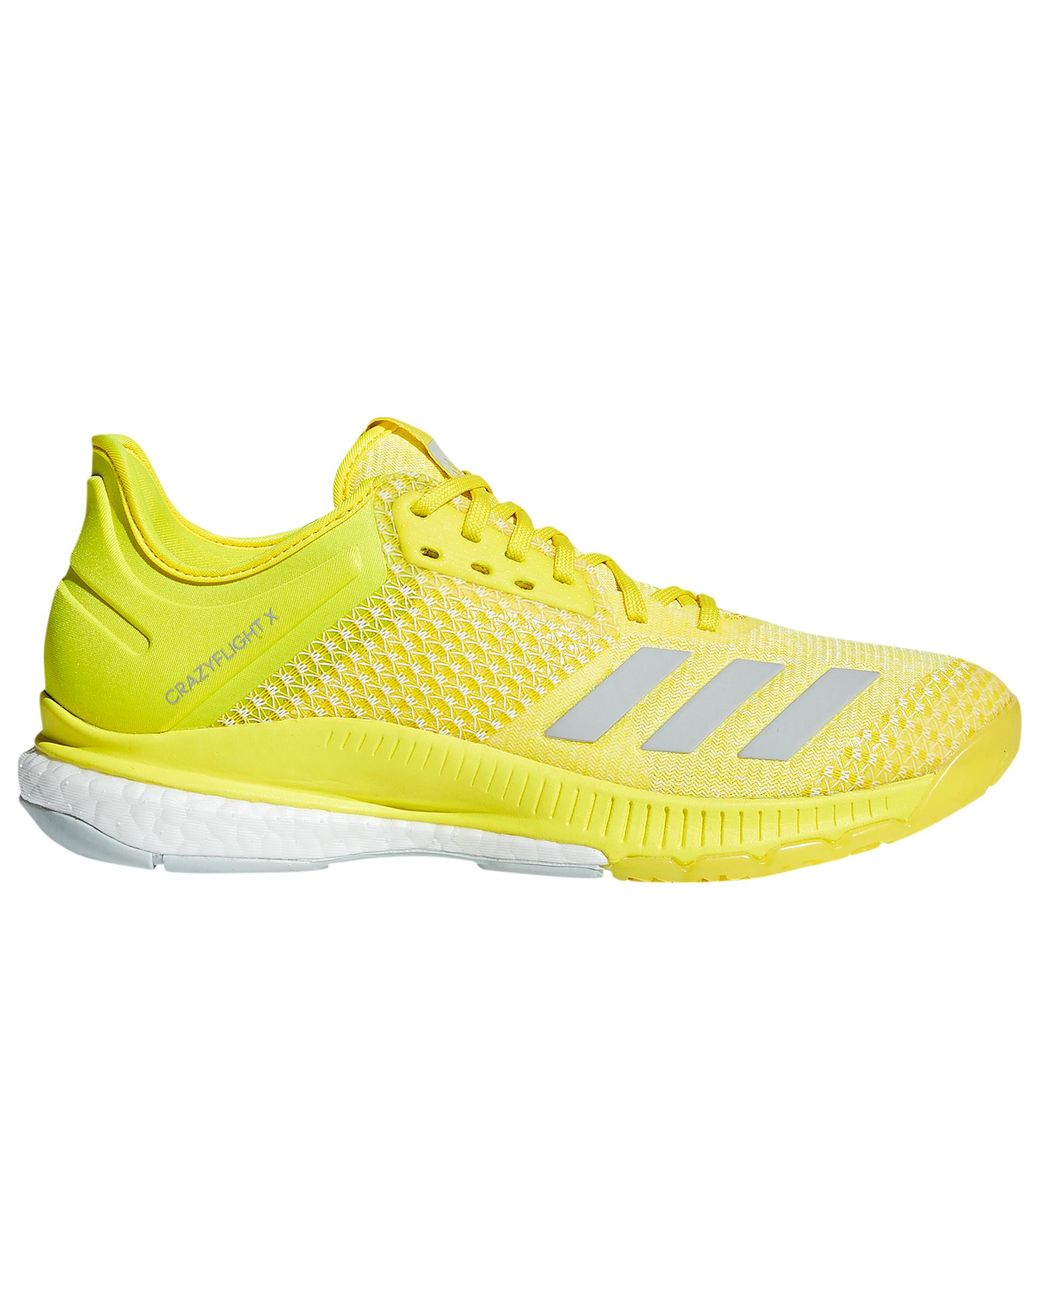 adidas Rubber Crazyflight X 2 Volleyball Shoes in Yellow | Lyst